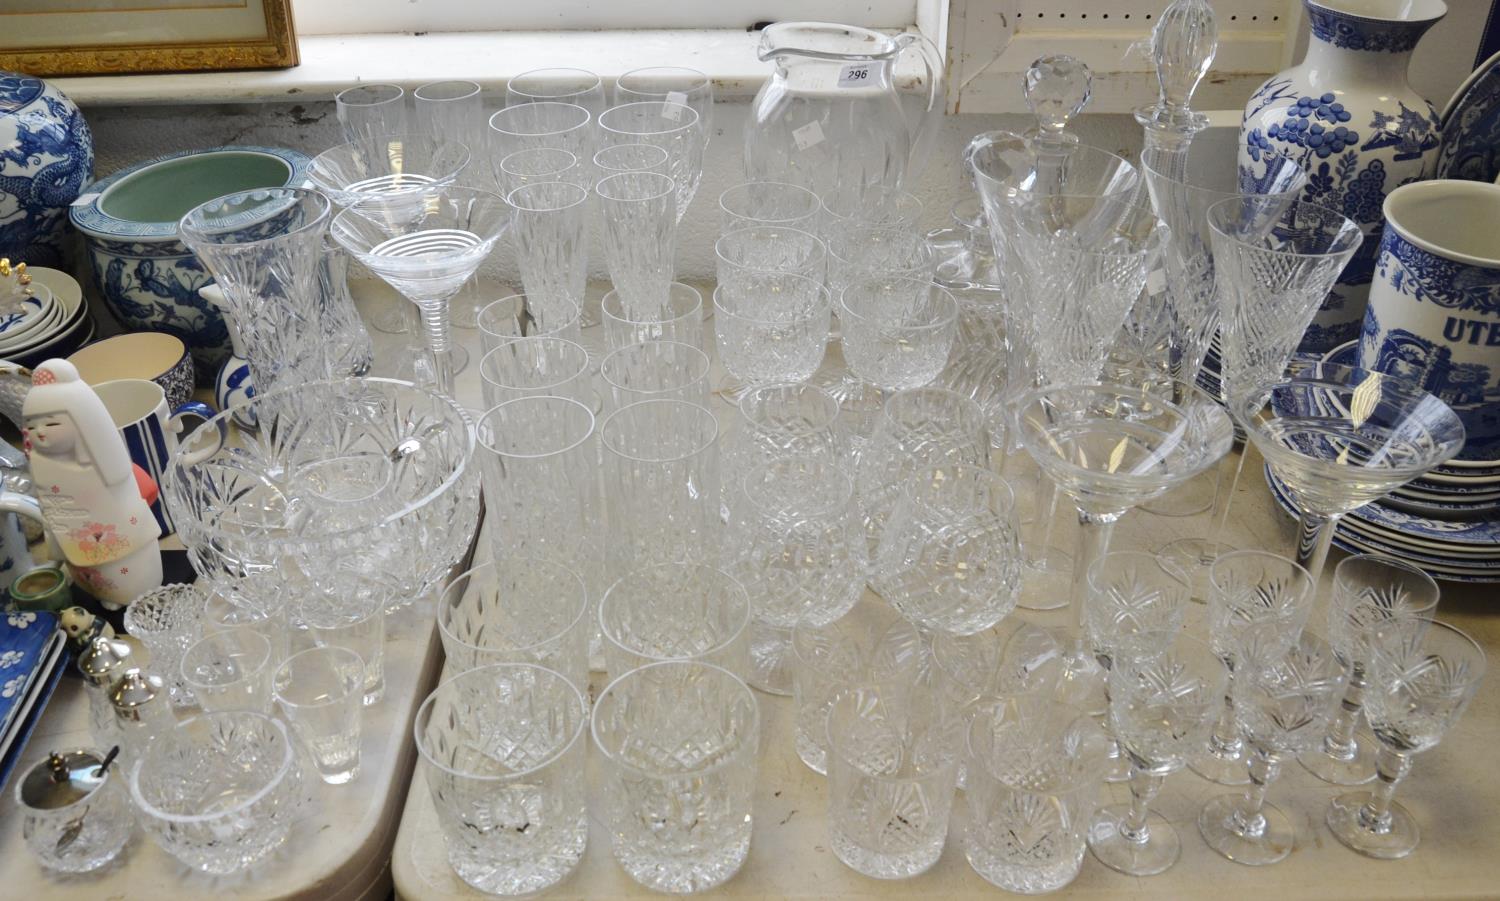 Glassware - comprehensive cut glass and crystal table setting of mainly Stuart crystal including